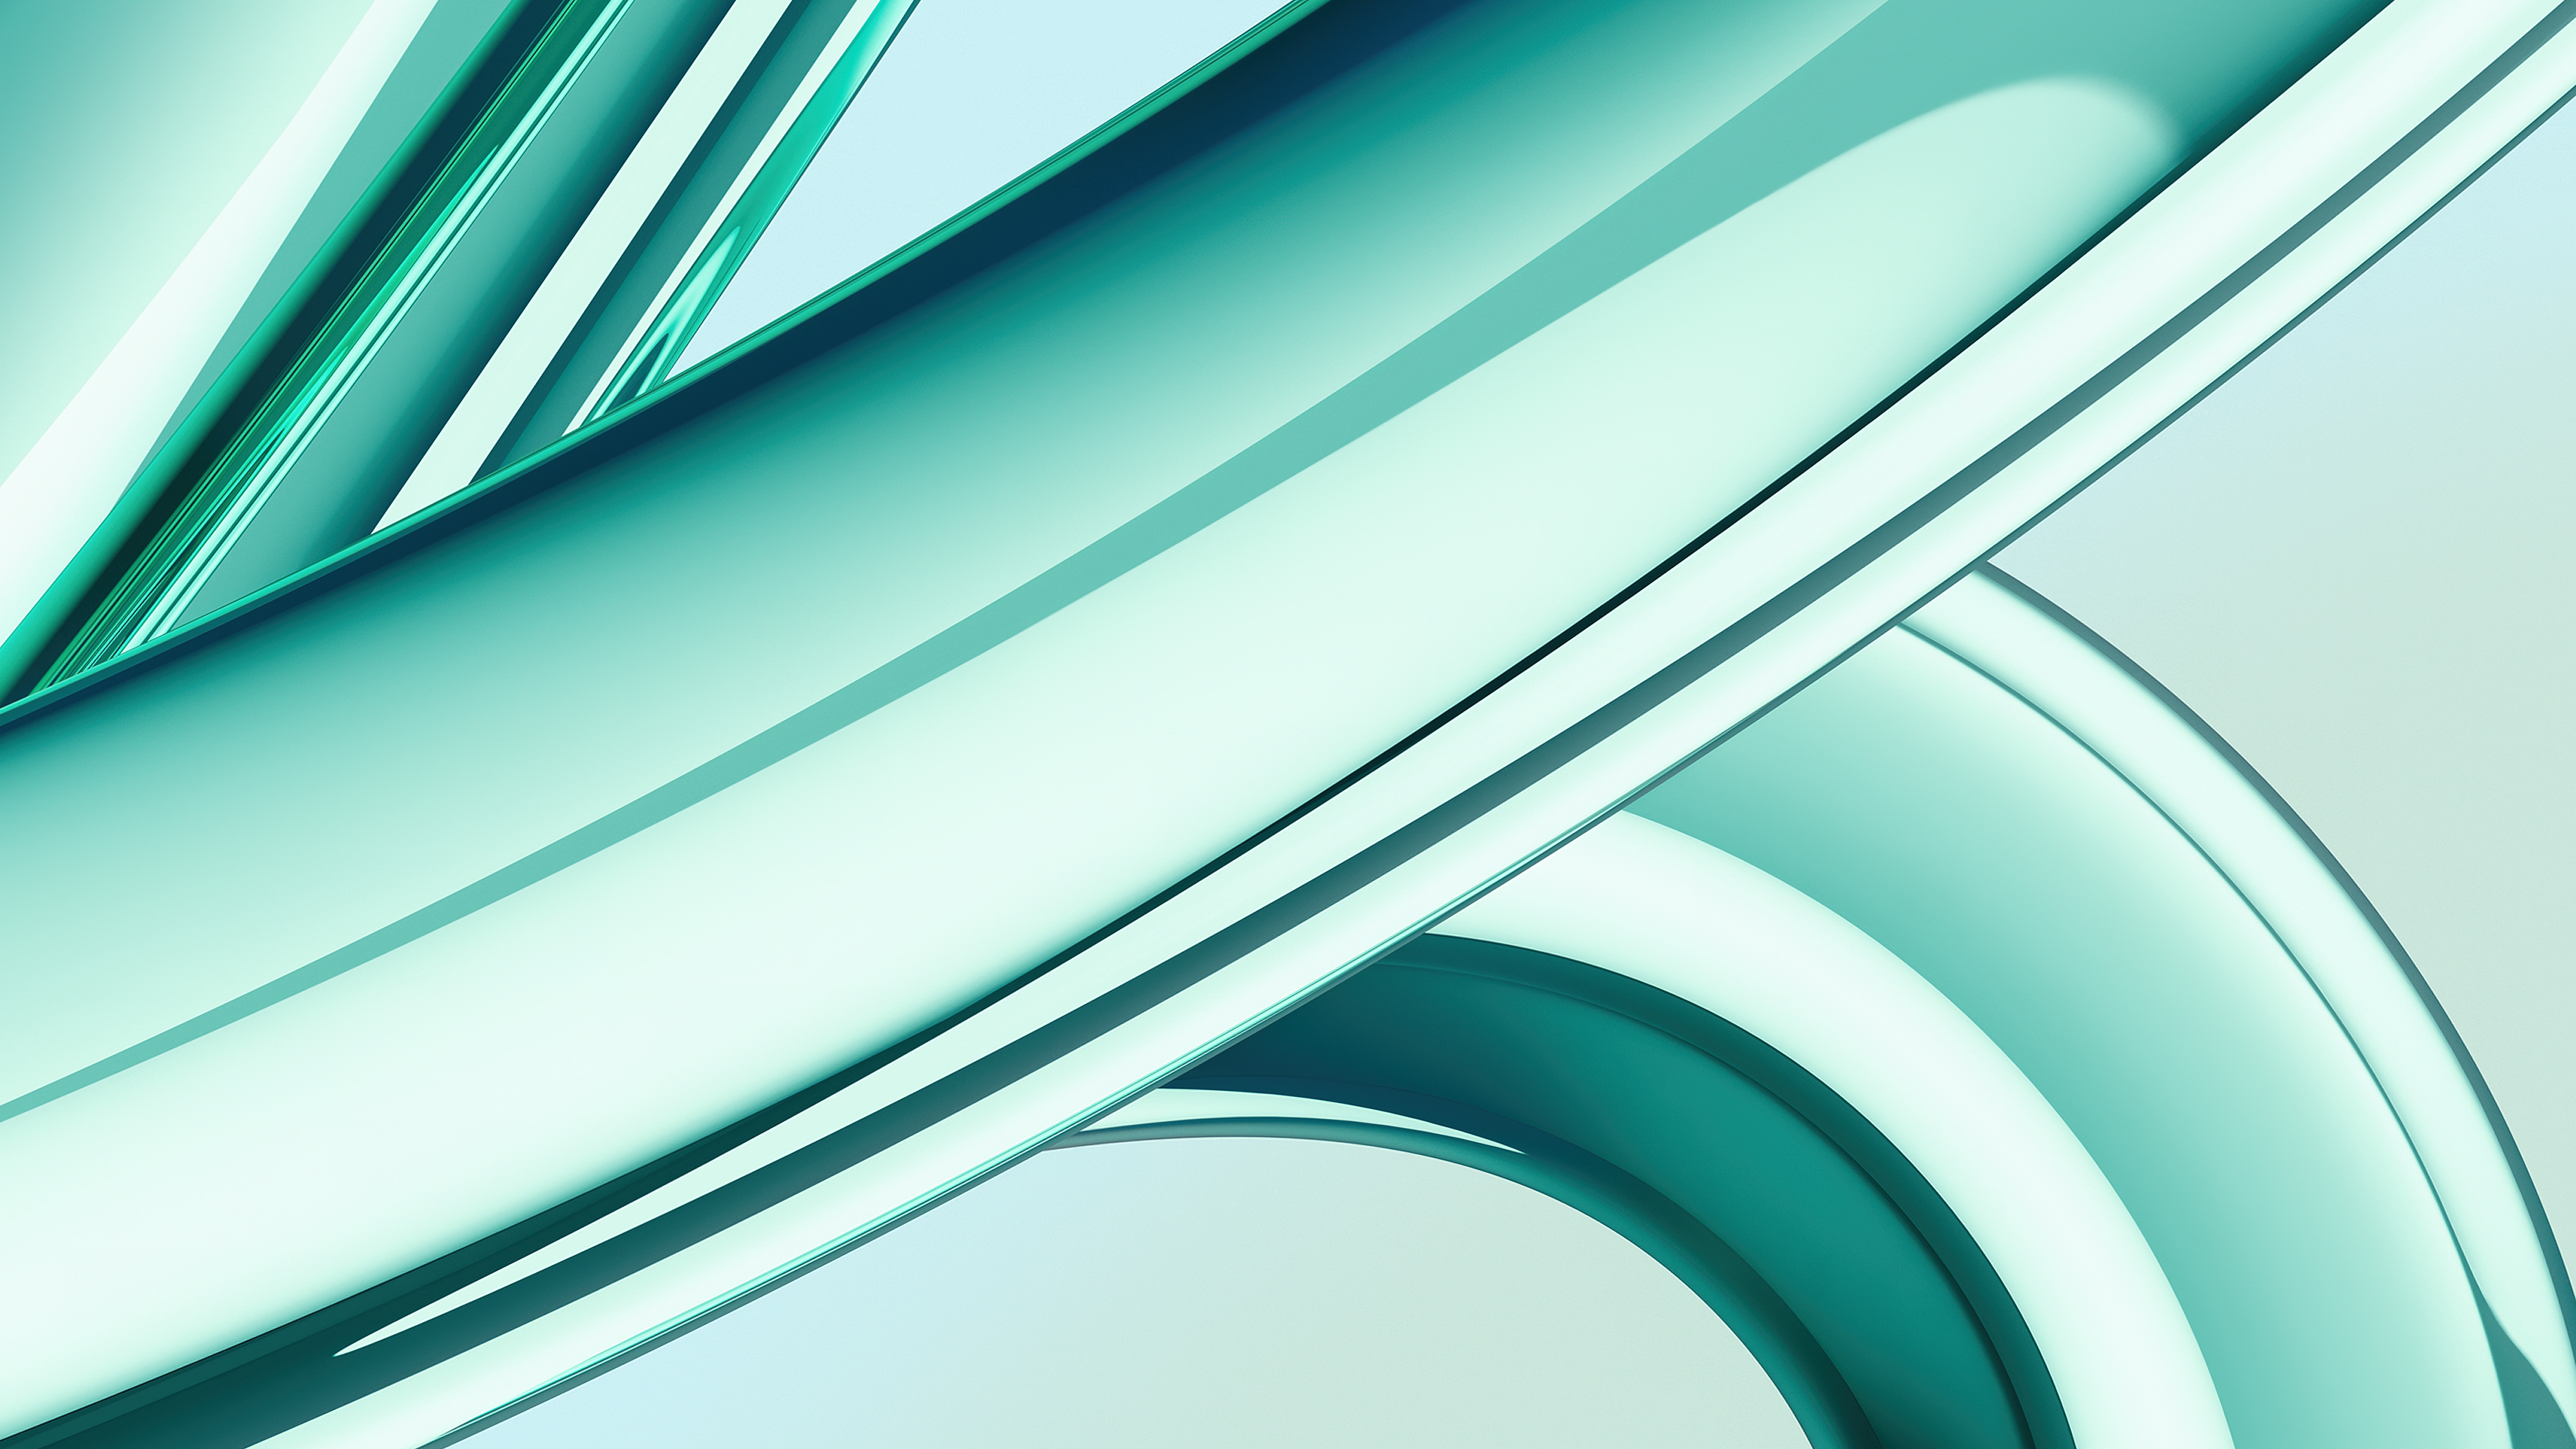 HD wallpaper, Imac 2023, Green Abstract, 5K, Abstract Background, Stock